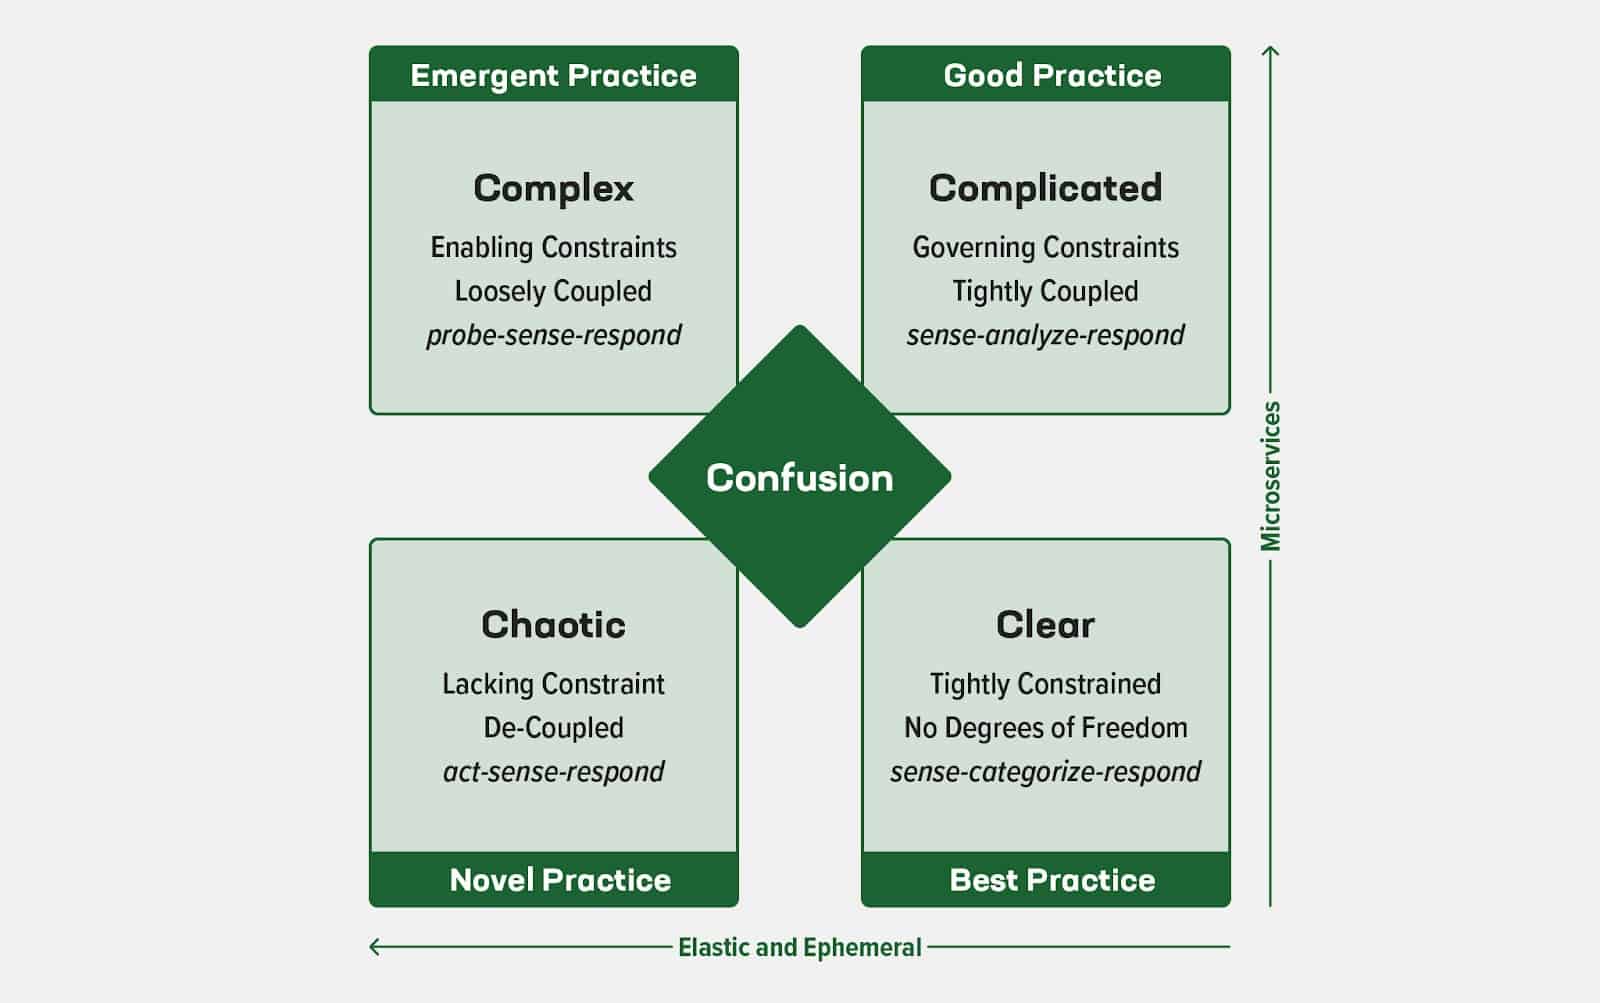 The Cynefin framework applied to microservices and elastic/ephemeral app instances (Emergent Practice, Good Practice, Novel Practice, Best Practice, and Confusion)